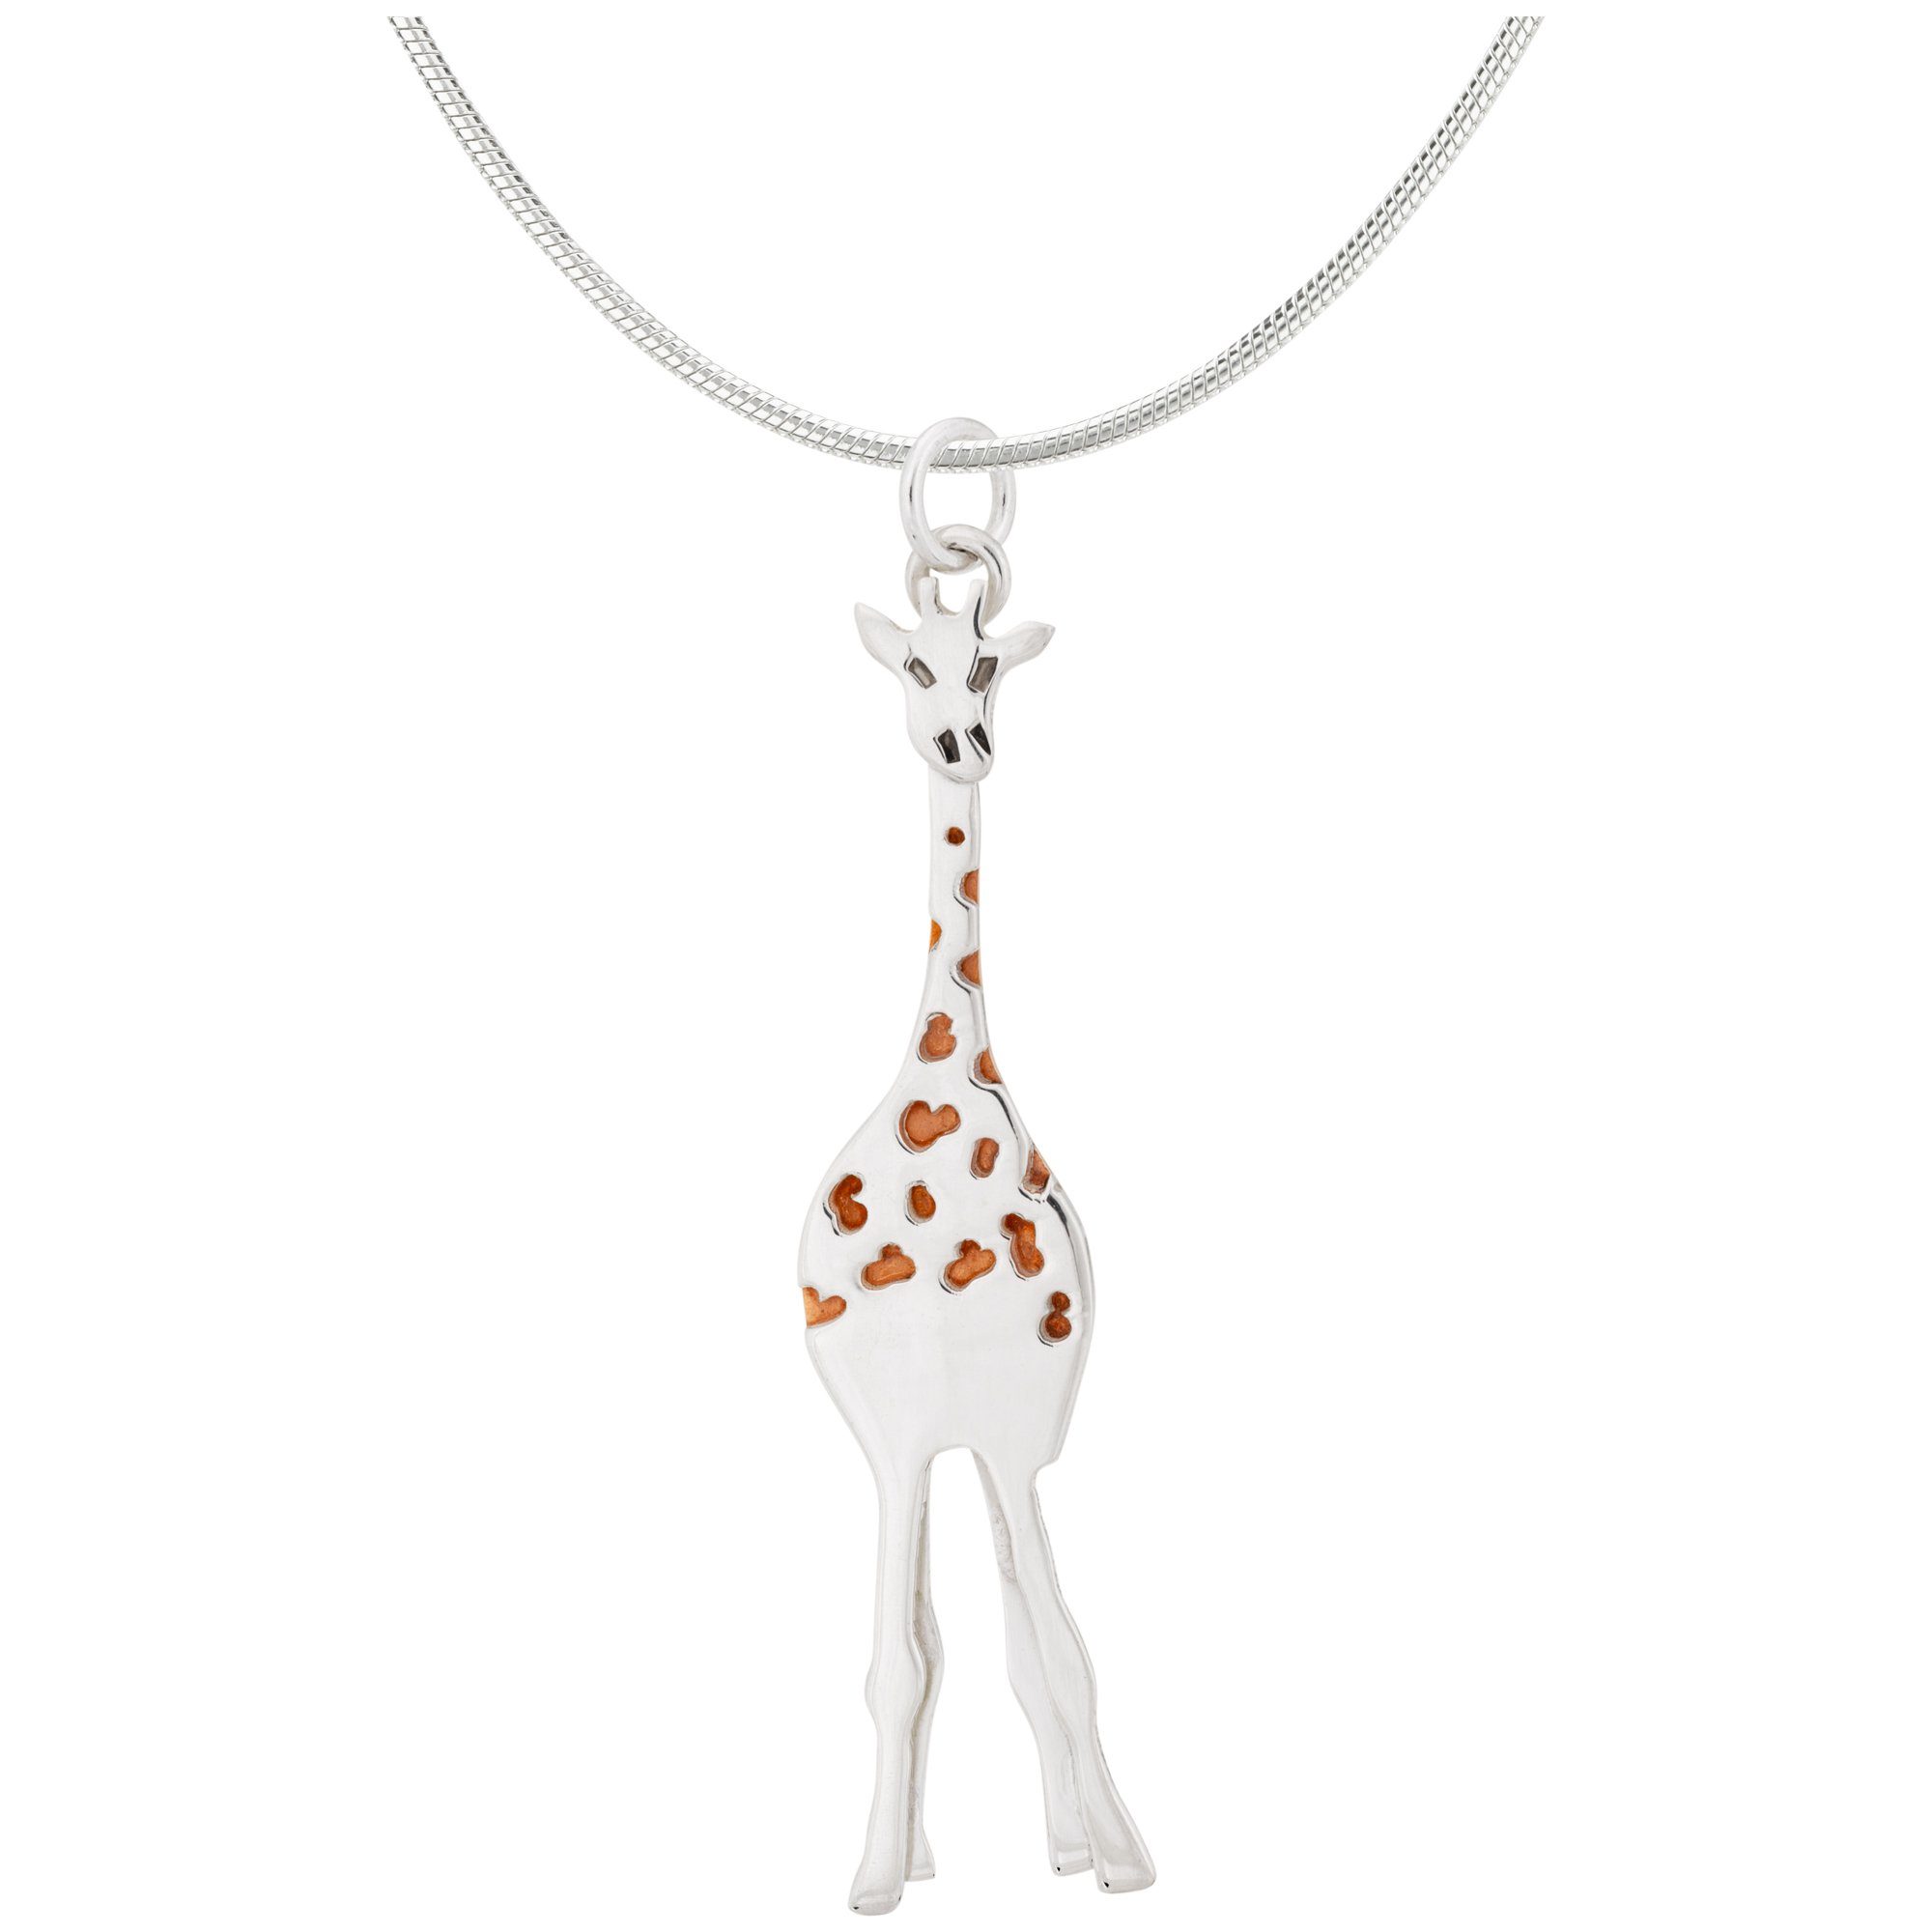 Gentle Giraffe Mixed Metal Necklace - With Sterling Cable Chain